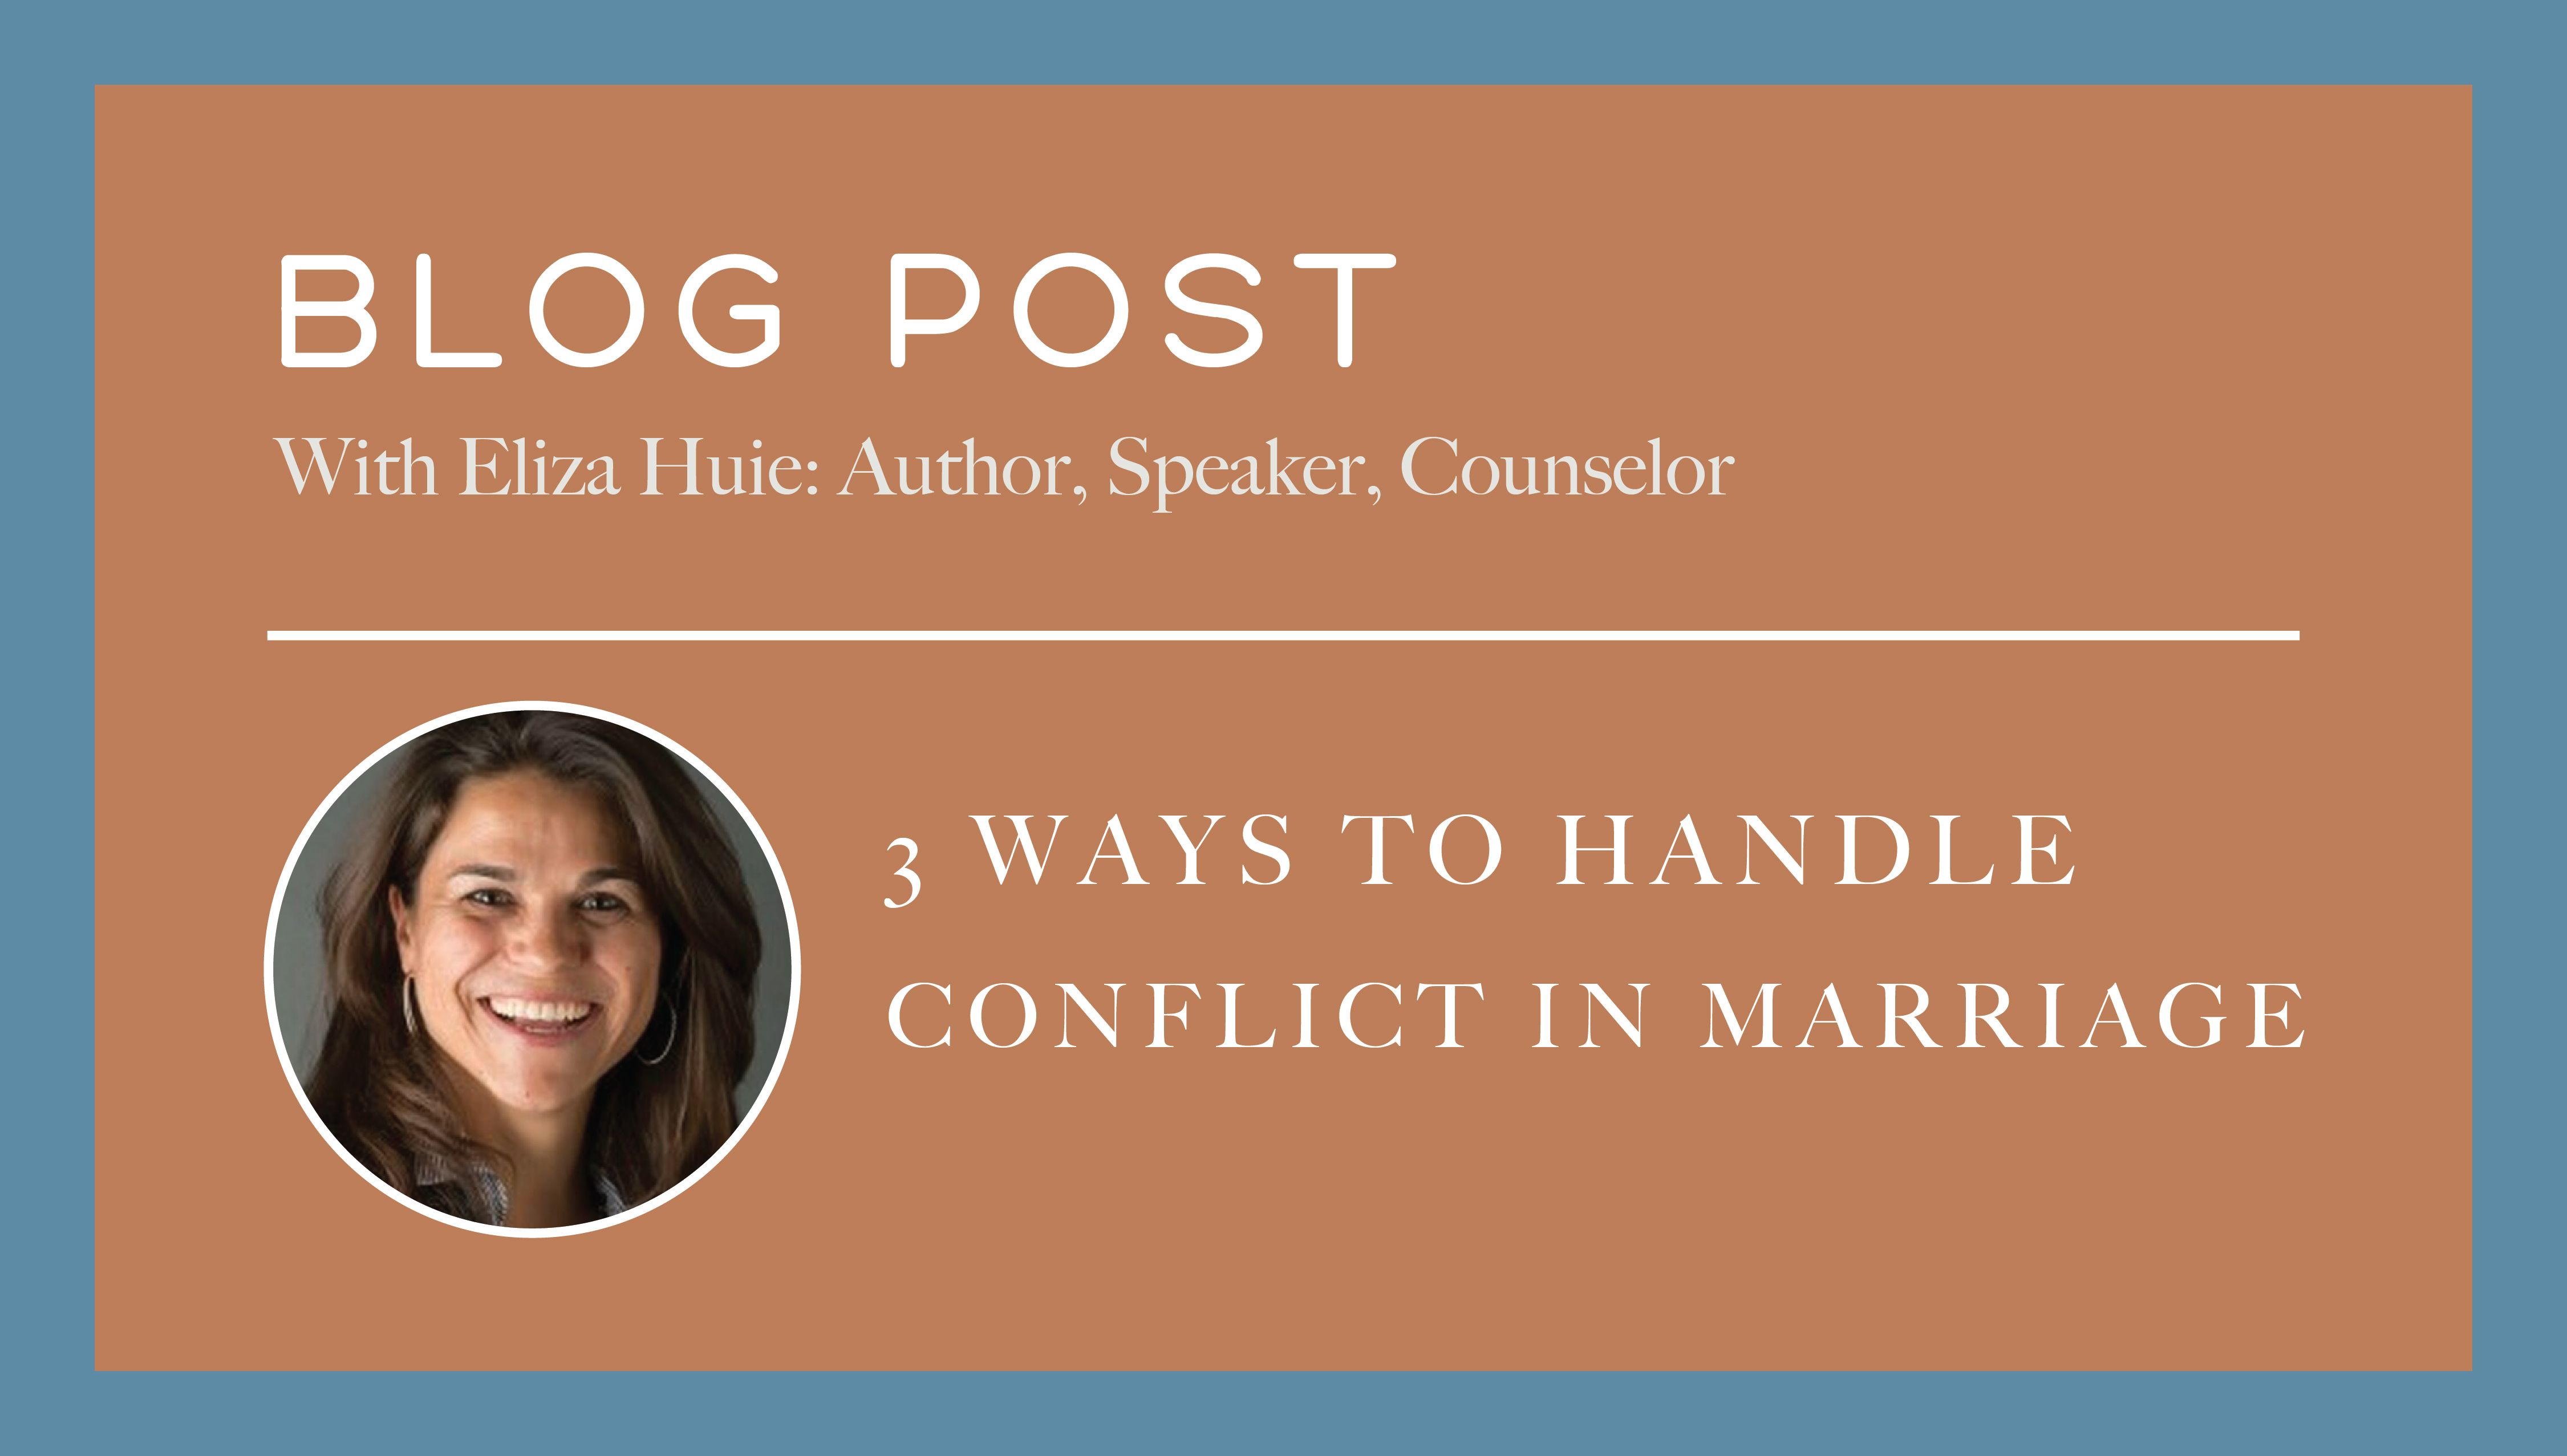 3 Ways to Handle Conflict in Marriage